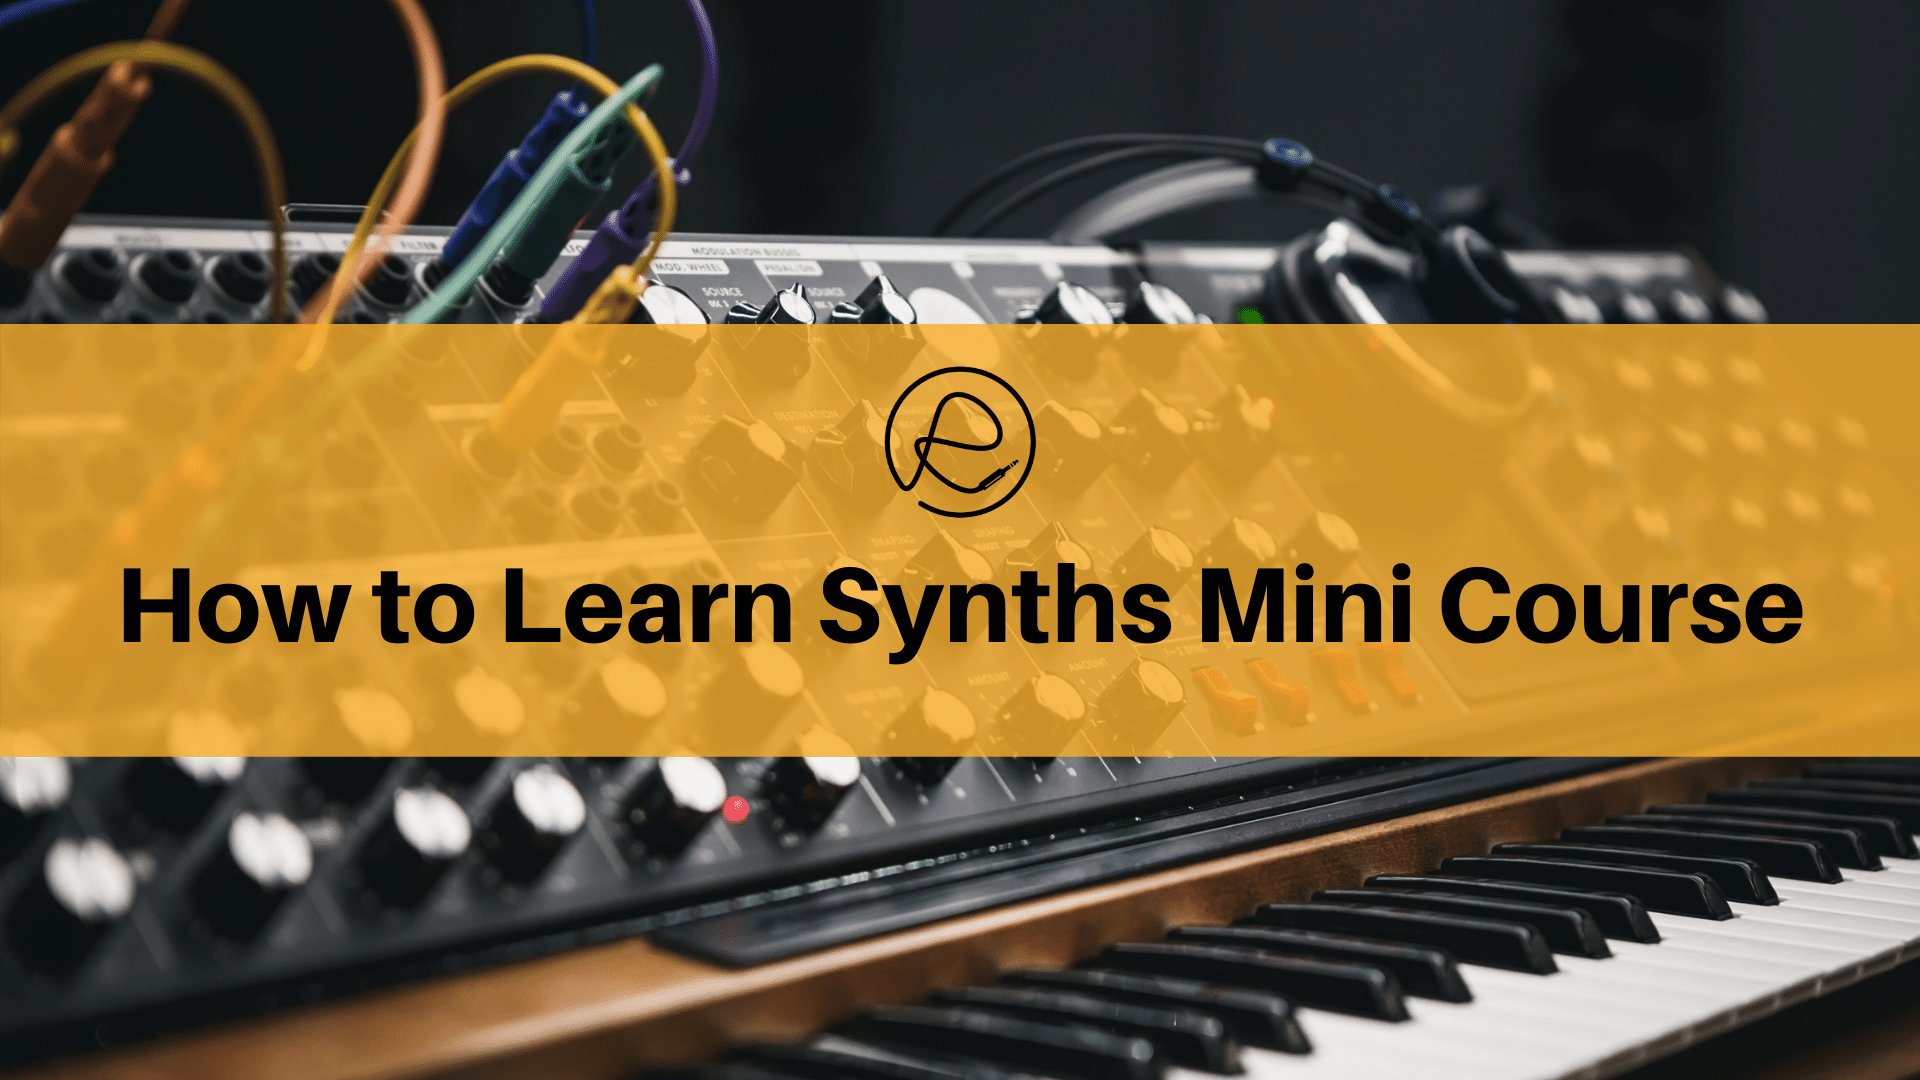 Synths Mini Course Cover